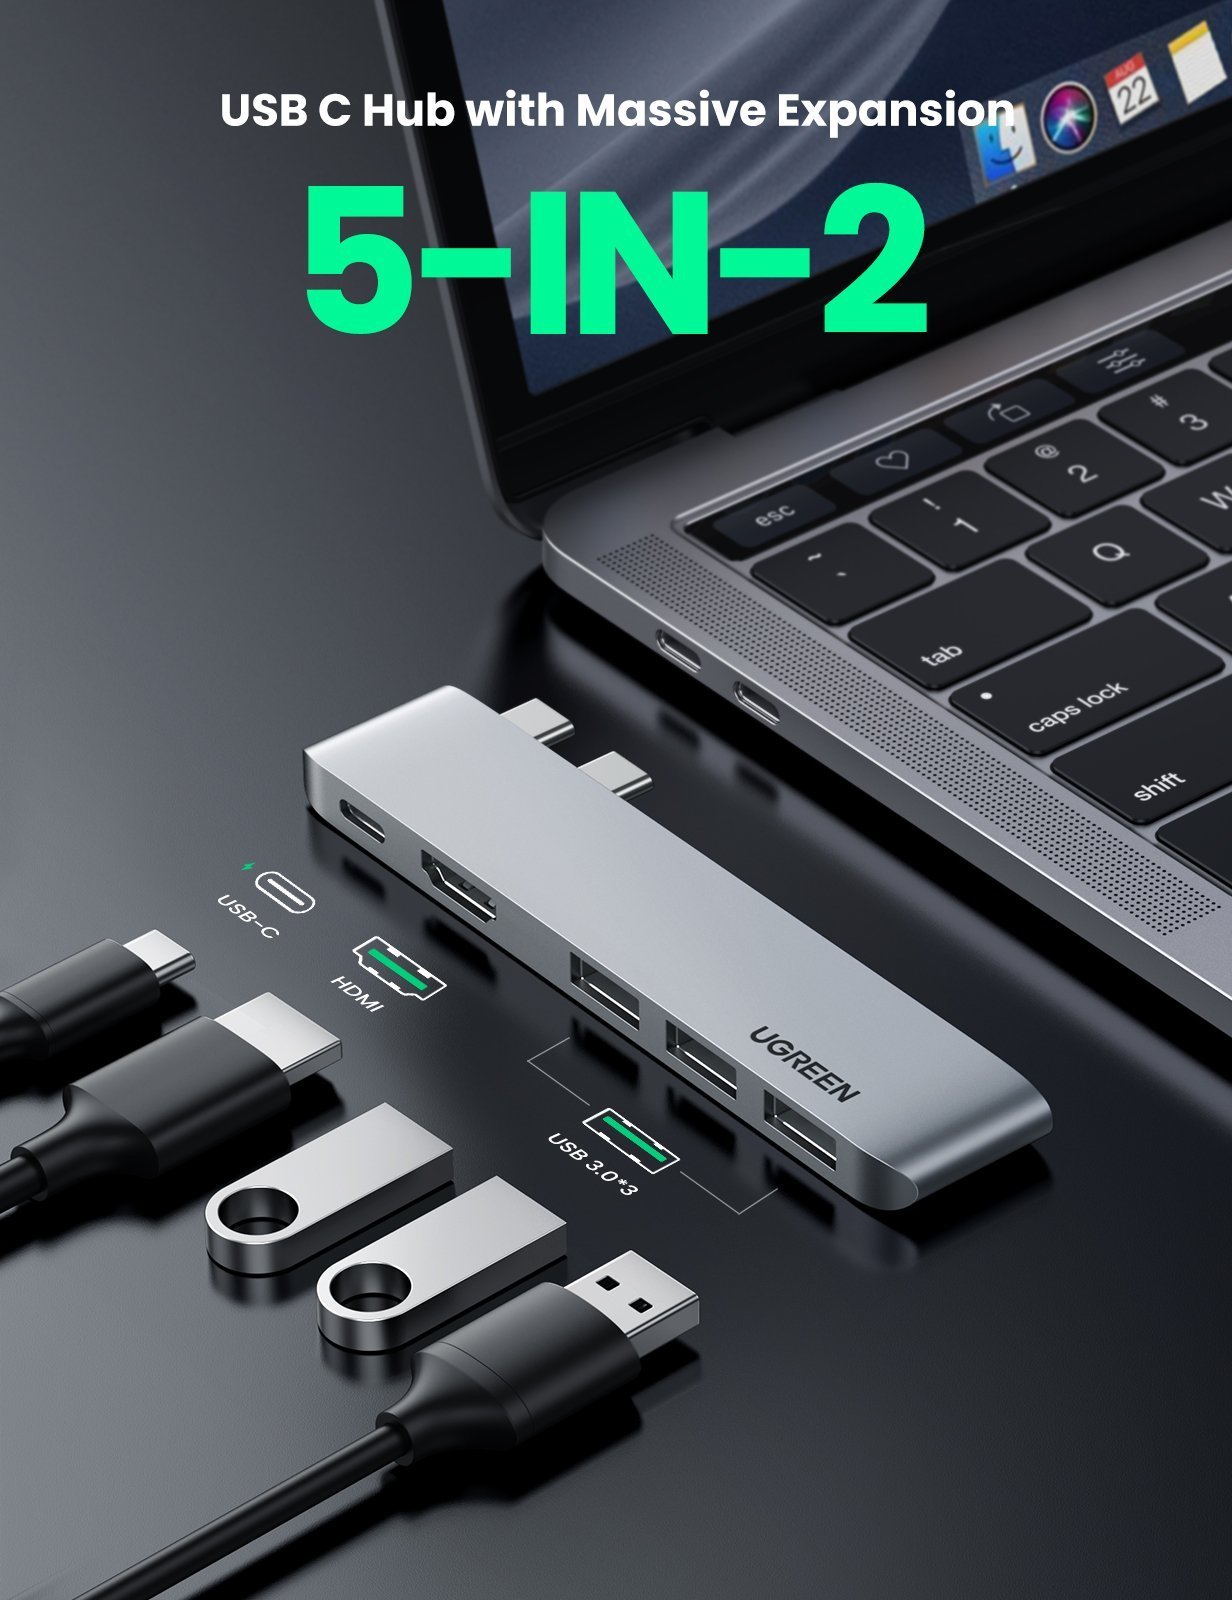  MacBook Pro Docking Station Dual Monitor MacBook Pro HDMI  Adapter,9 in 1 USB C Adapters for MacBook Pro Air Mac HDMI Dock Dongle Dual  USB C to Dual HDMI Ethernet 3USB